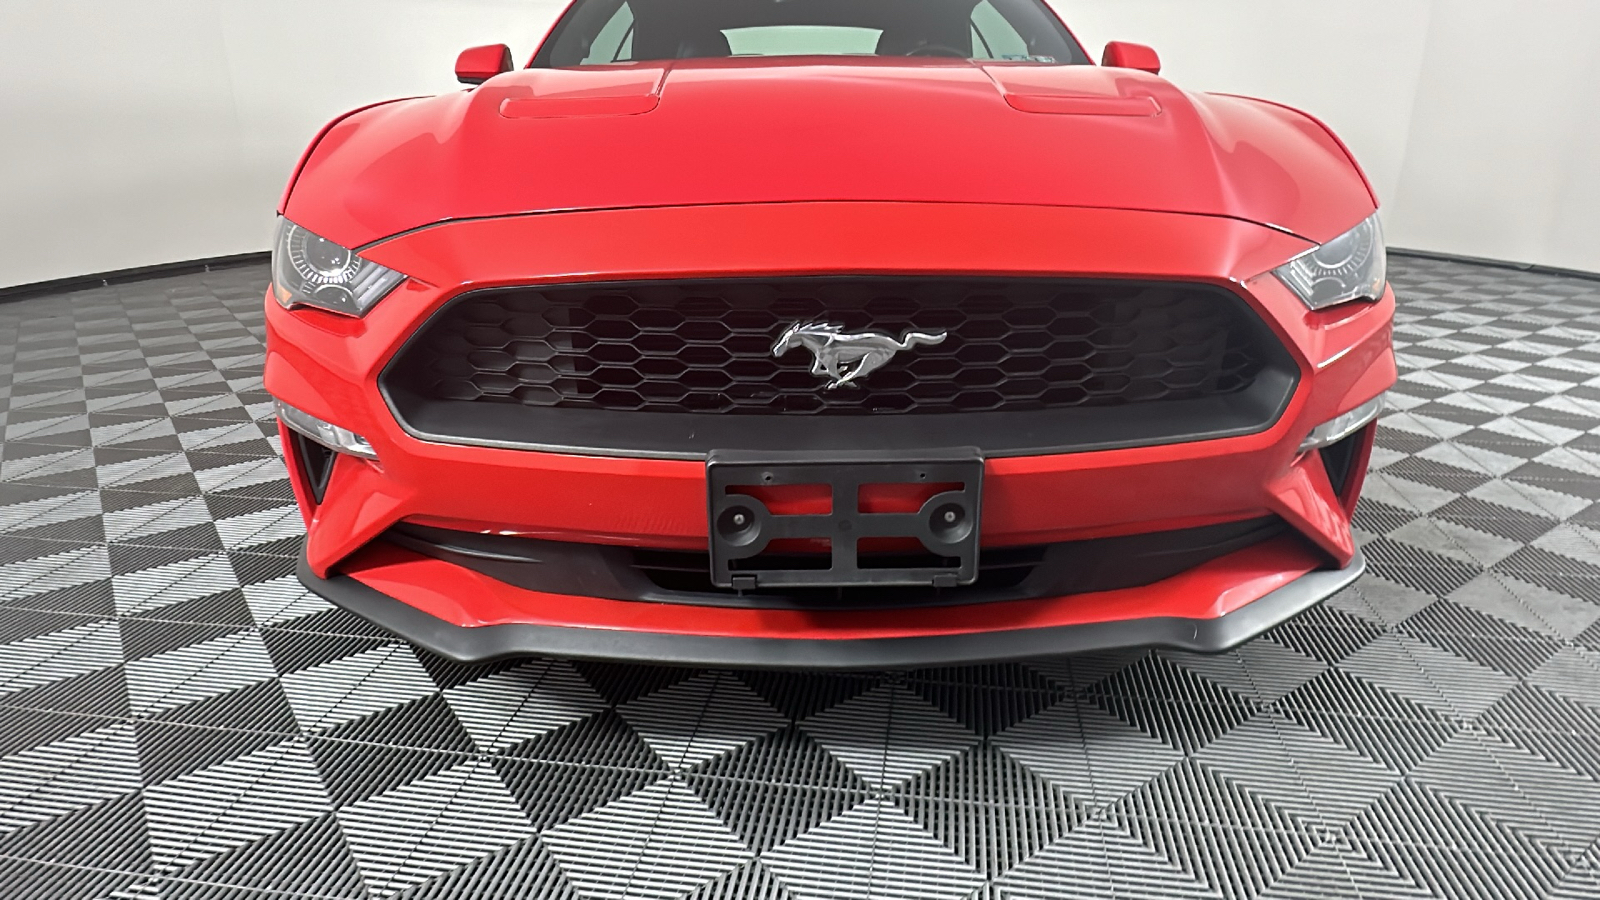 2021 Ford Mustang EcoBoost Premium 5